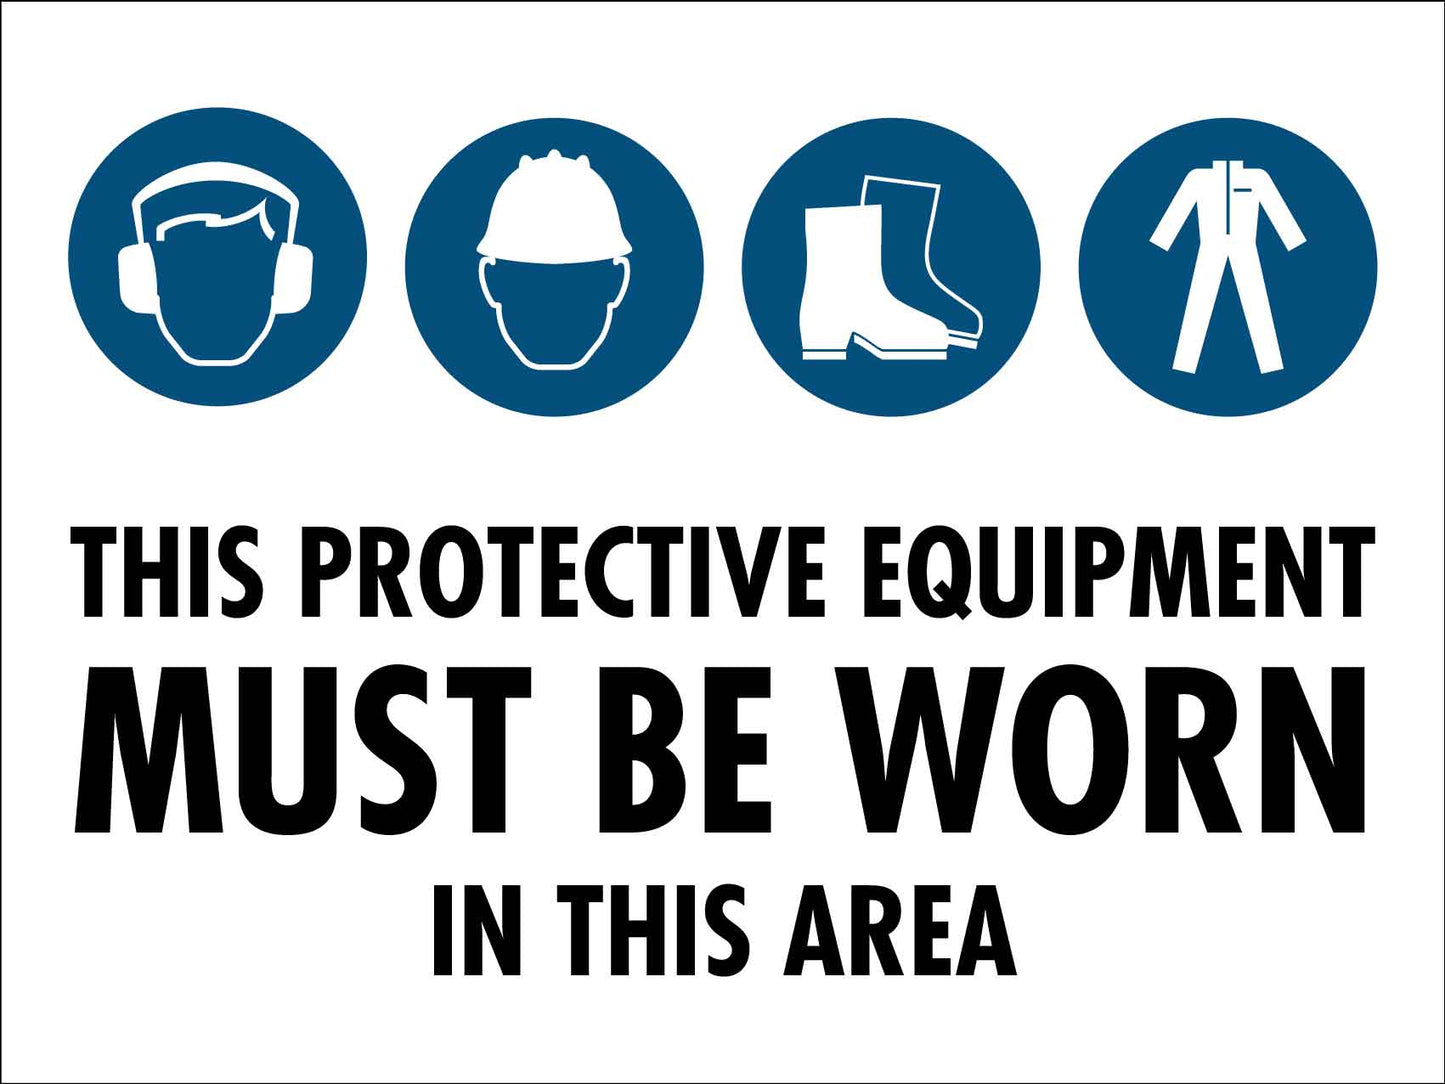 Building Site Protection Equipment Must Be Worn Sign